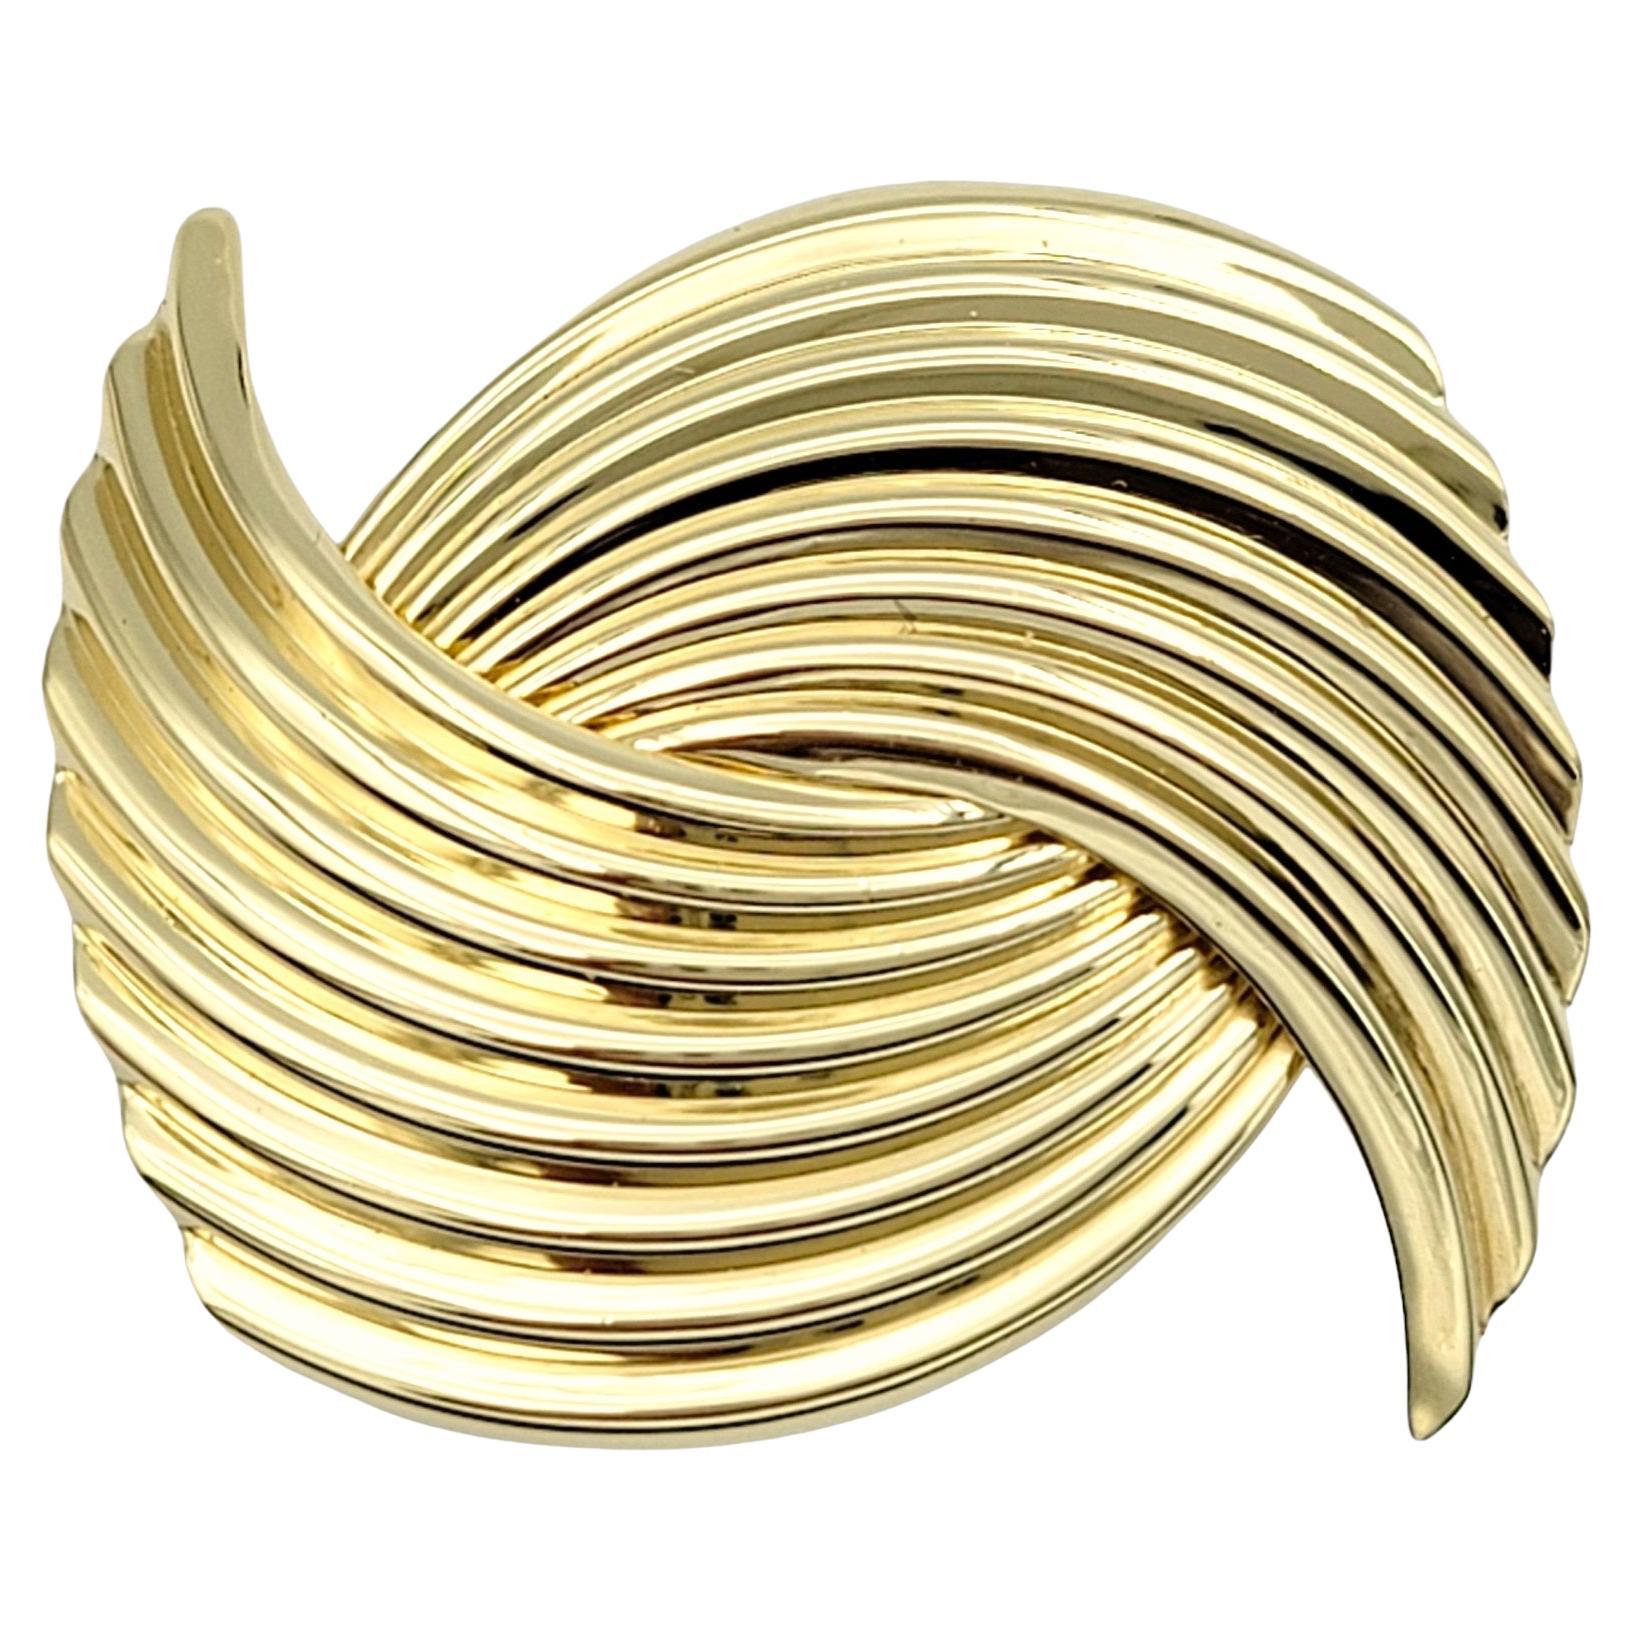 Vintage Cartier Bypass Design Ridged Brooch Set in Polished 14 Karat Yellow Gold For Sale